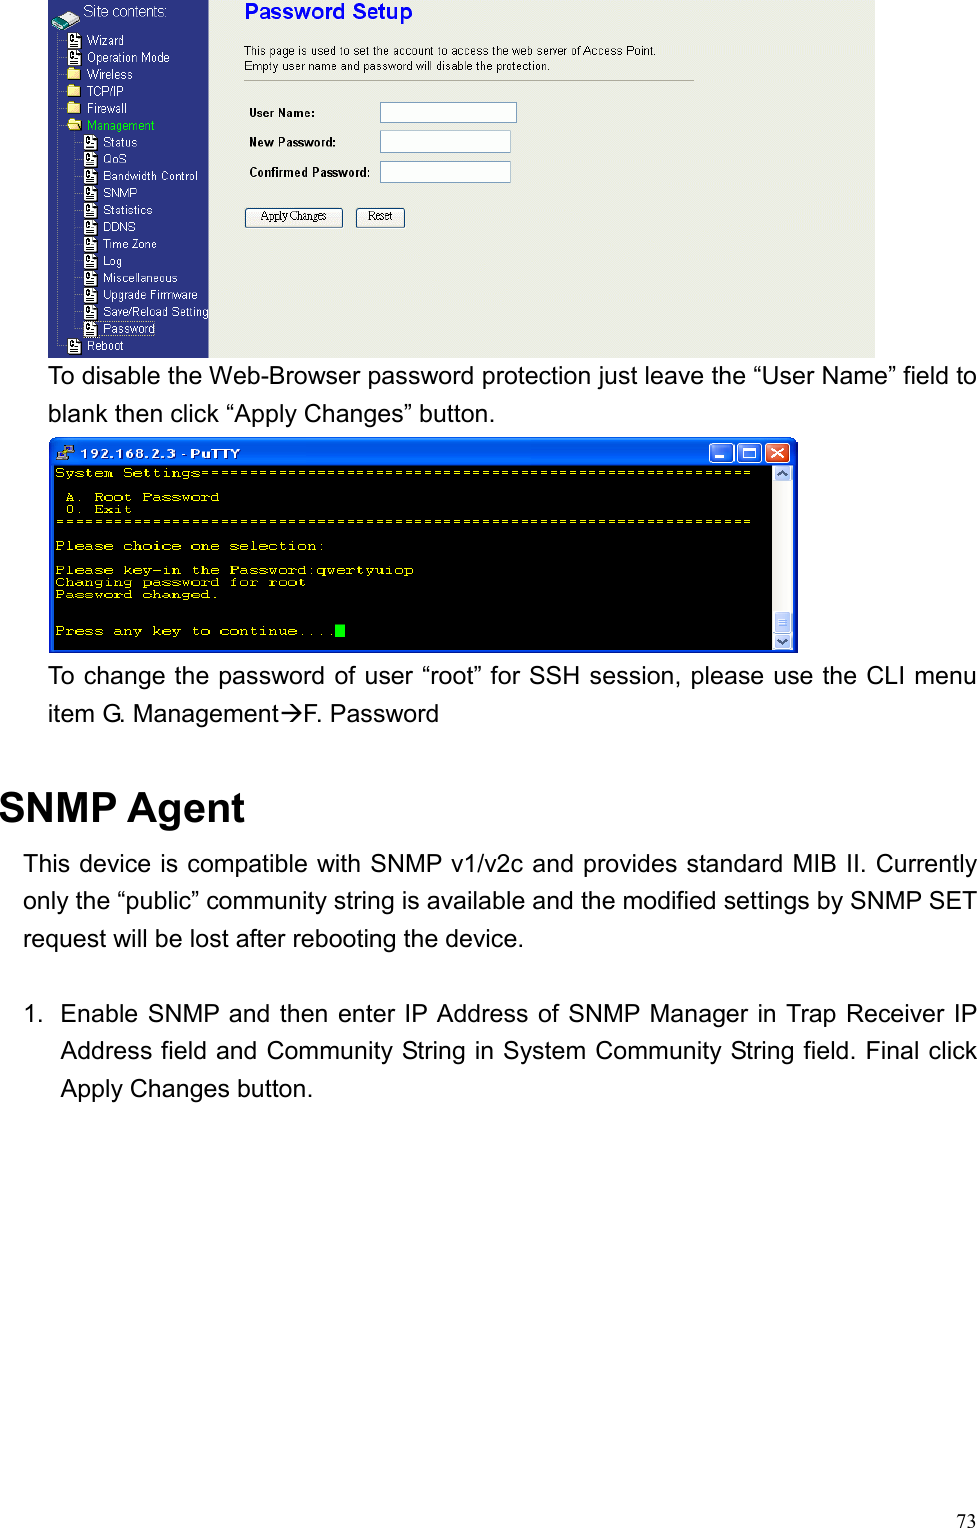  73 To disable the Web-Browser password protection just leave the “User Name” field to blank then click “Apply Changes” button.  To change the password of user “root” for SSH session, please use the CLI menu item G. ManagementF. Password  SNMP Agent This device is compatible with SNMP v1/v2c and provides standard MIB II. Currently only the “public” community string is available and the modified settings by SNMP SET request will be lost after rebooting the device.  1.  Enable SNMP and then enter IP Address of SNMP Manager in Trap Receiver IP Address field and Community String in System Community String field. Final click Apply Changes button.  